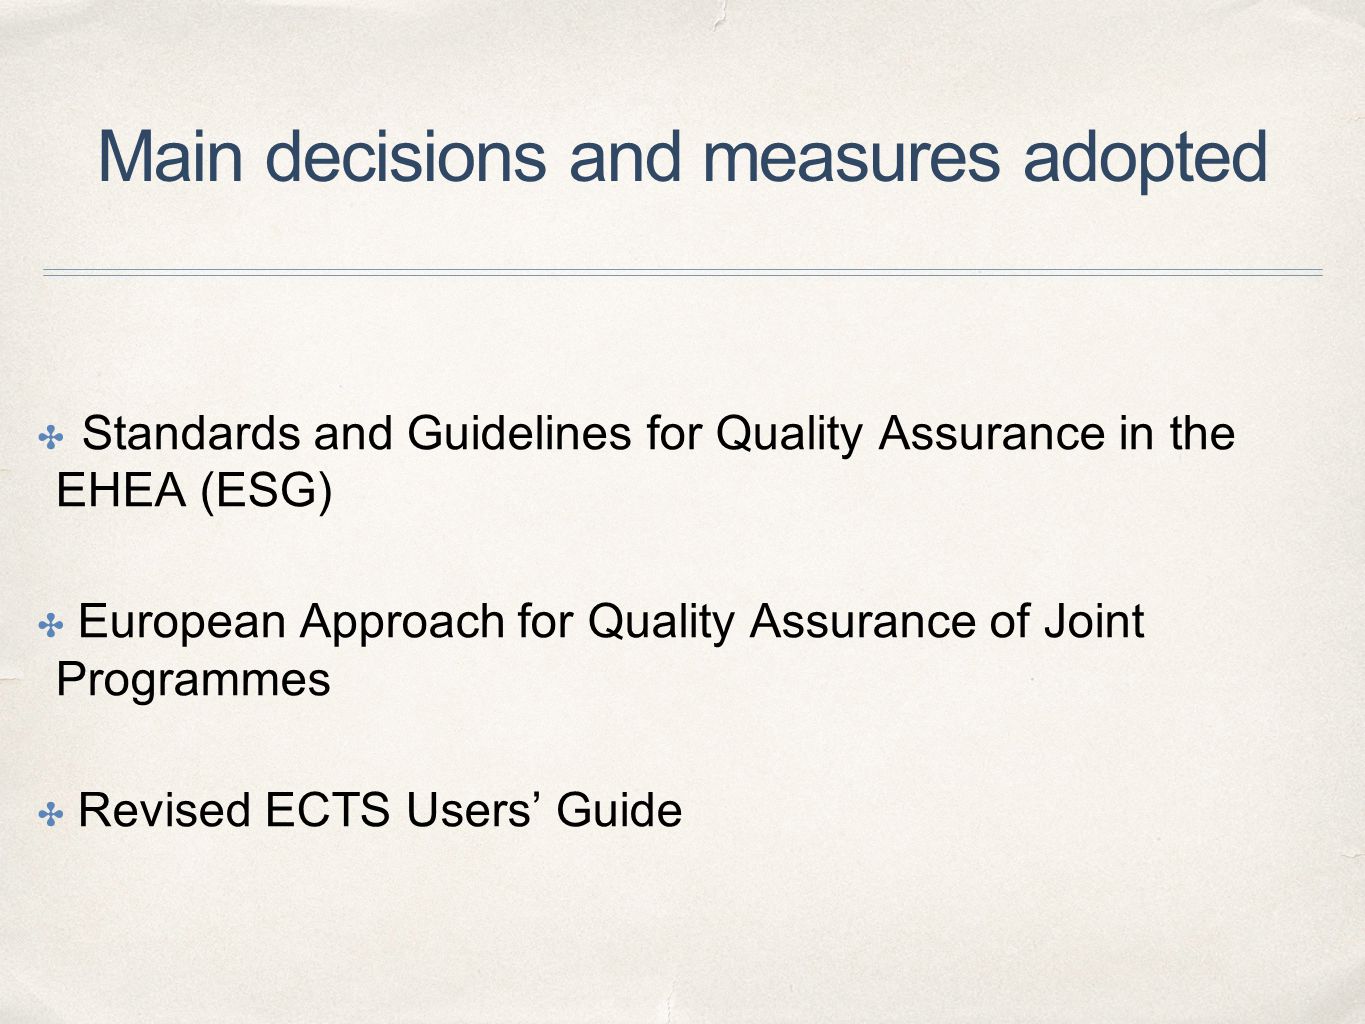 Main decisions and measures adopted ✤ Standards and Guidelines for Quality Assurance in the EHEA (ESG) ✤ European Approach for Quality Assurance of Joint Programmes ✤ Revised ECTS Users’ Guide